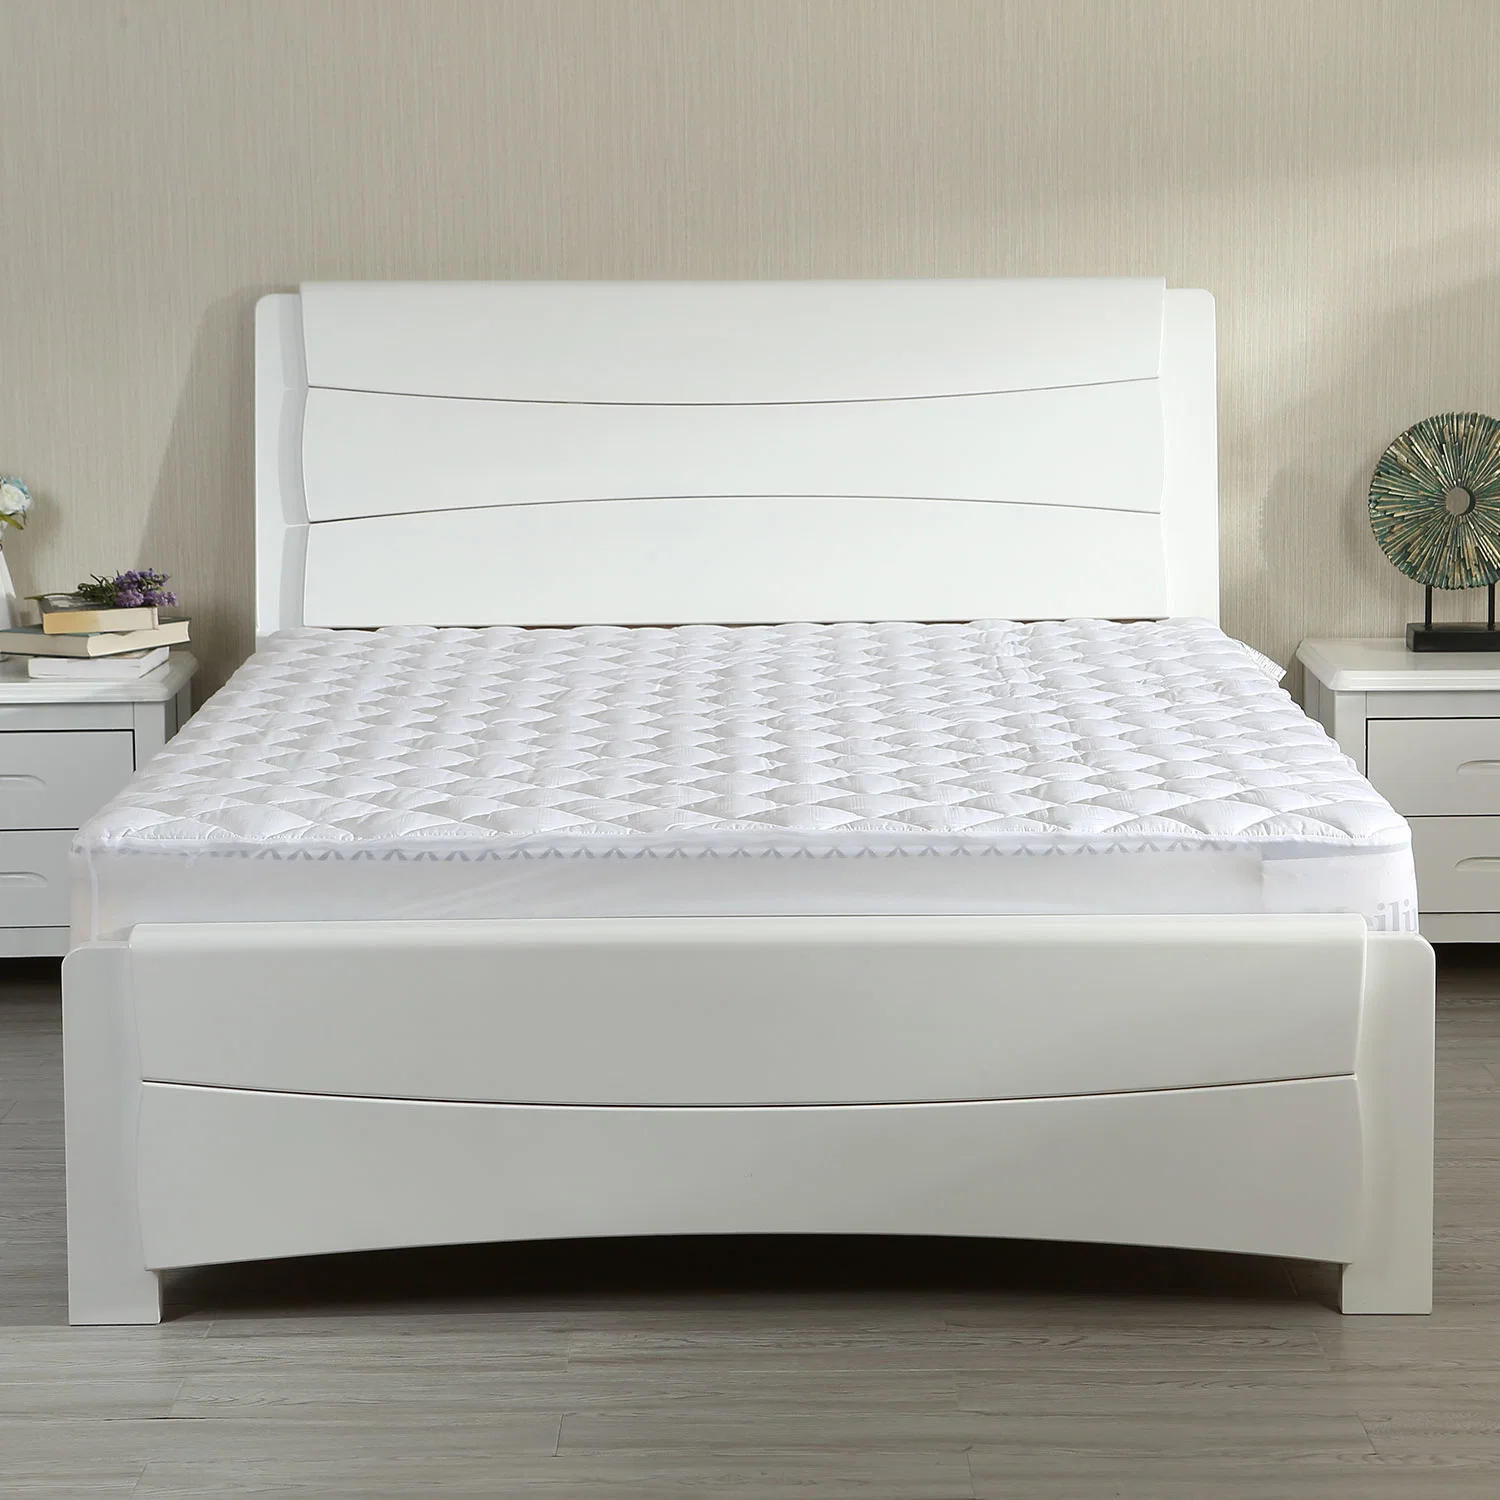 Super Soft Breathable Waterproof Mattress Cover with Elastic Fabric